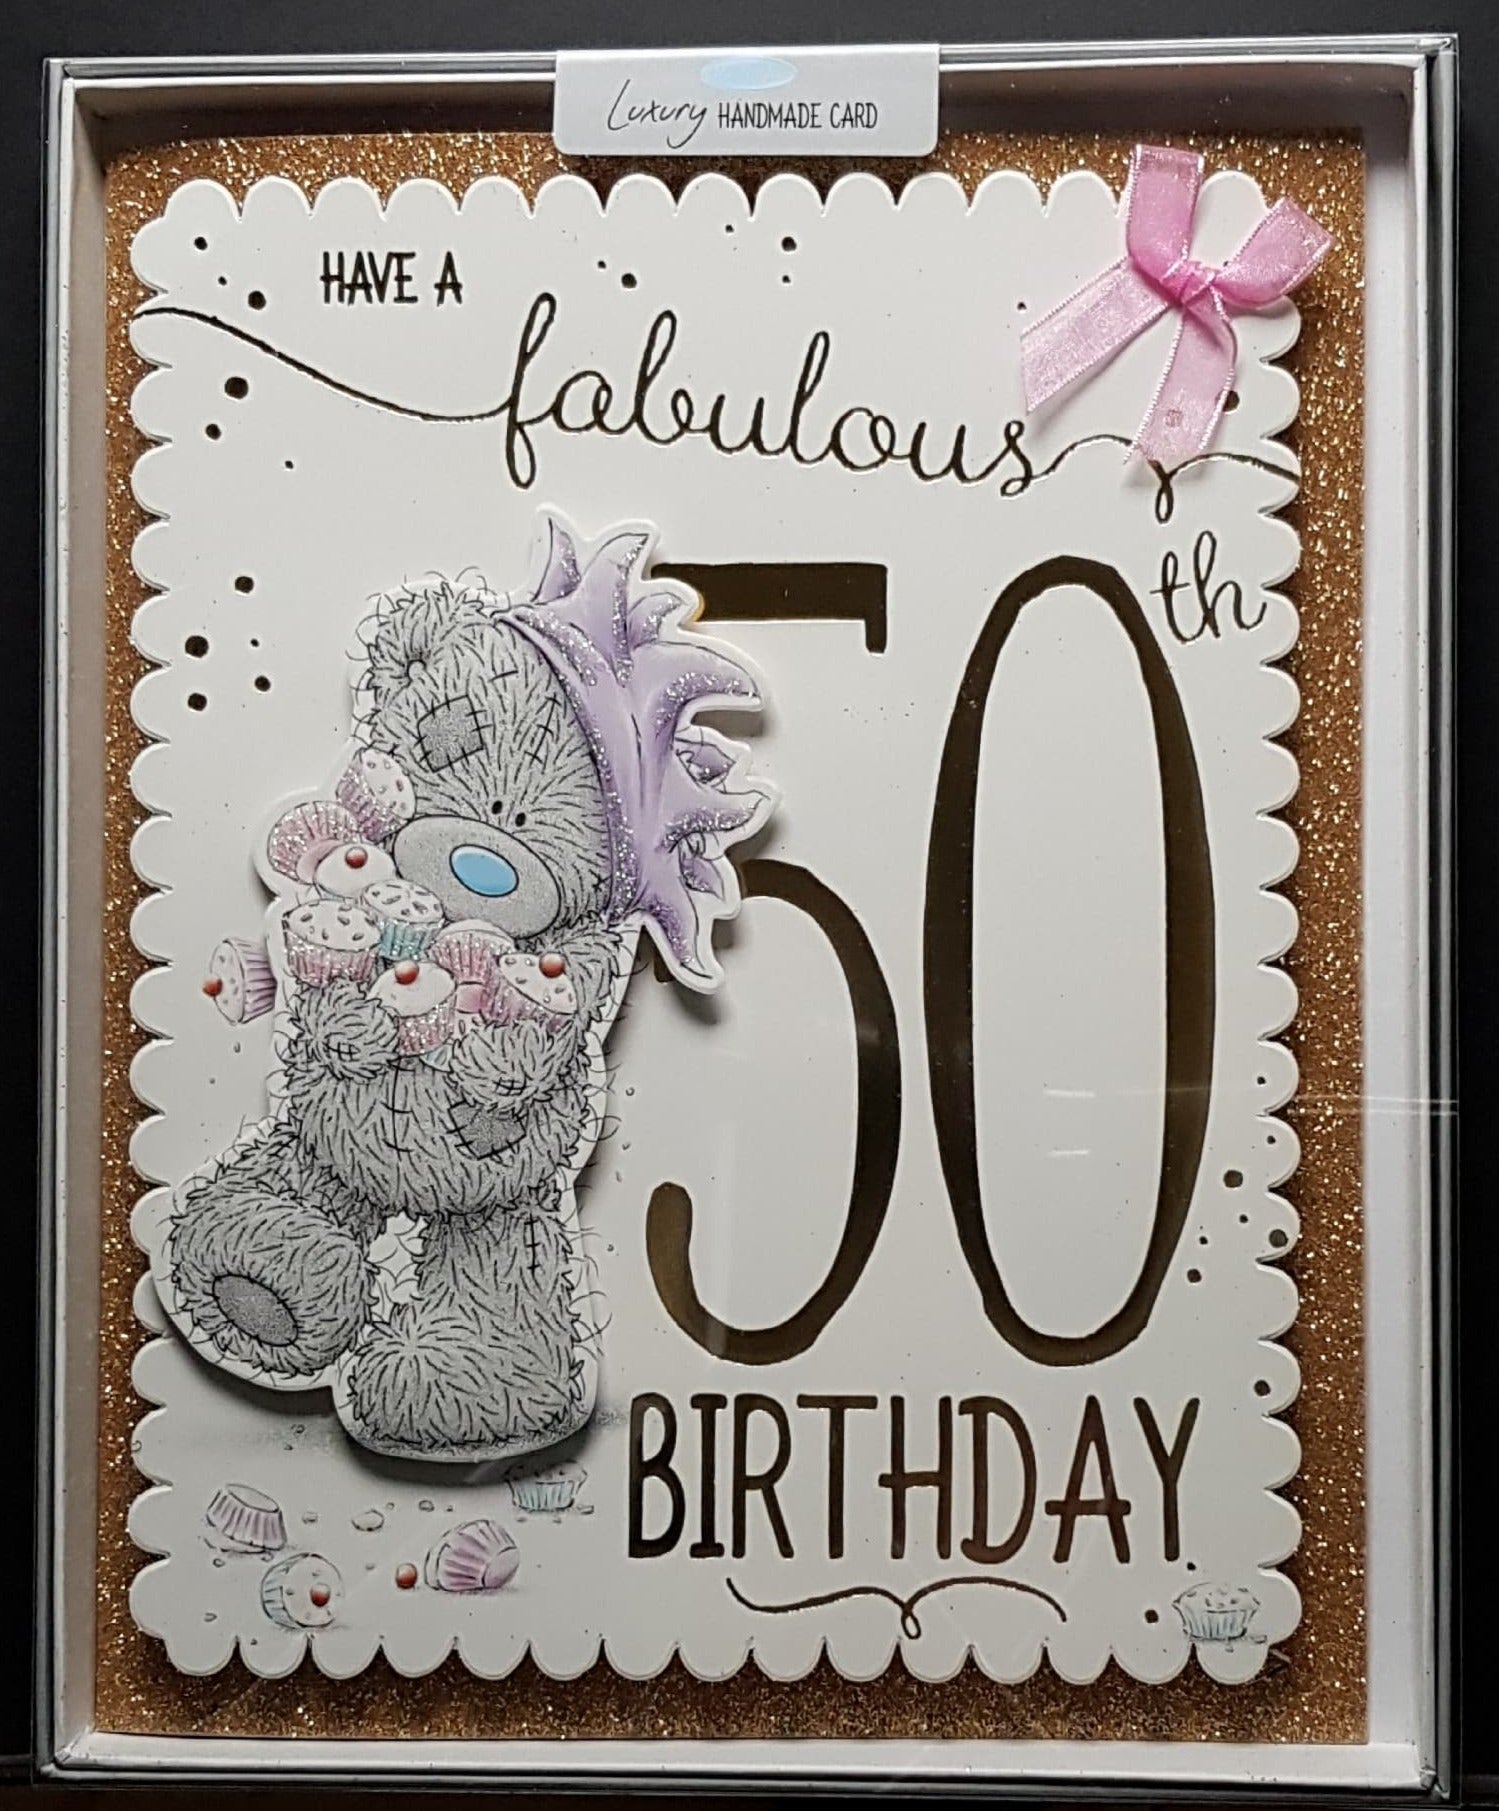 Age 50 Birthday Card - Teddy A In Purple Hat Holding Cupcakes (Card In A Presentation Box)